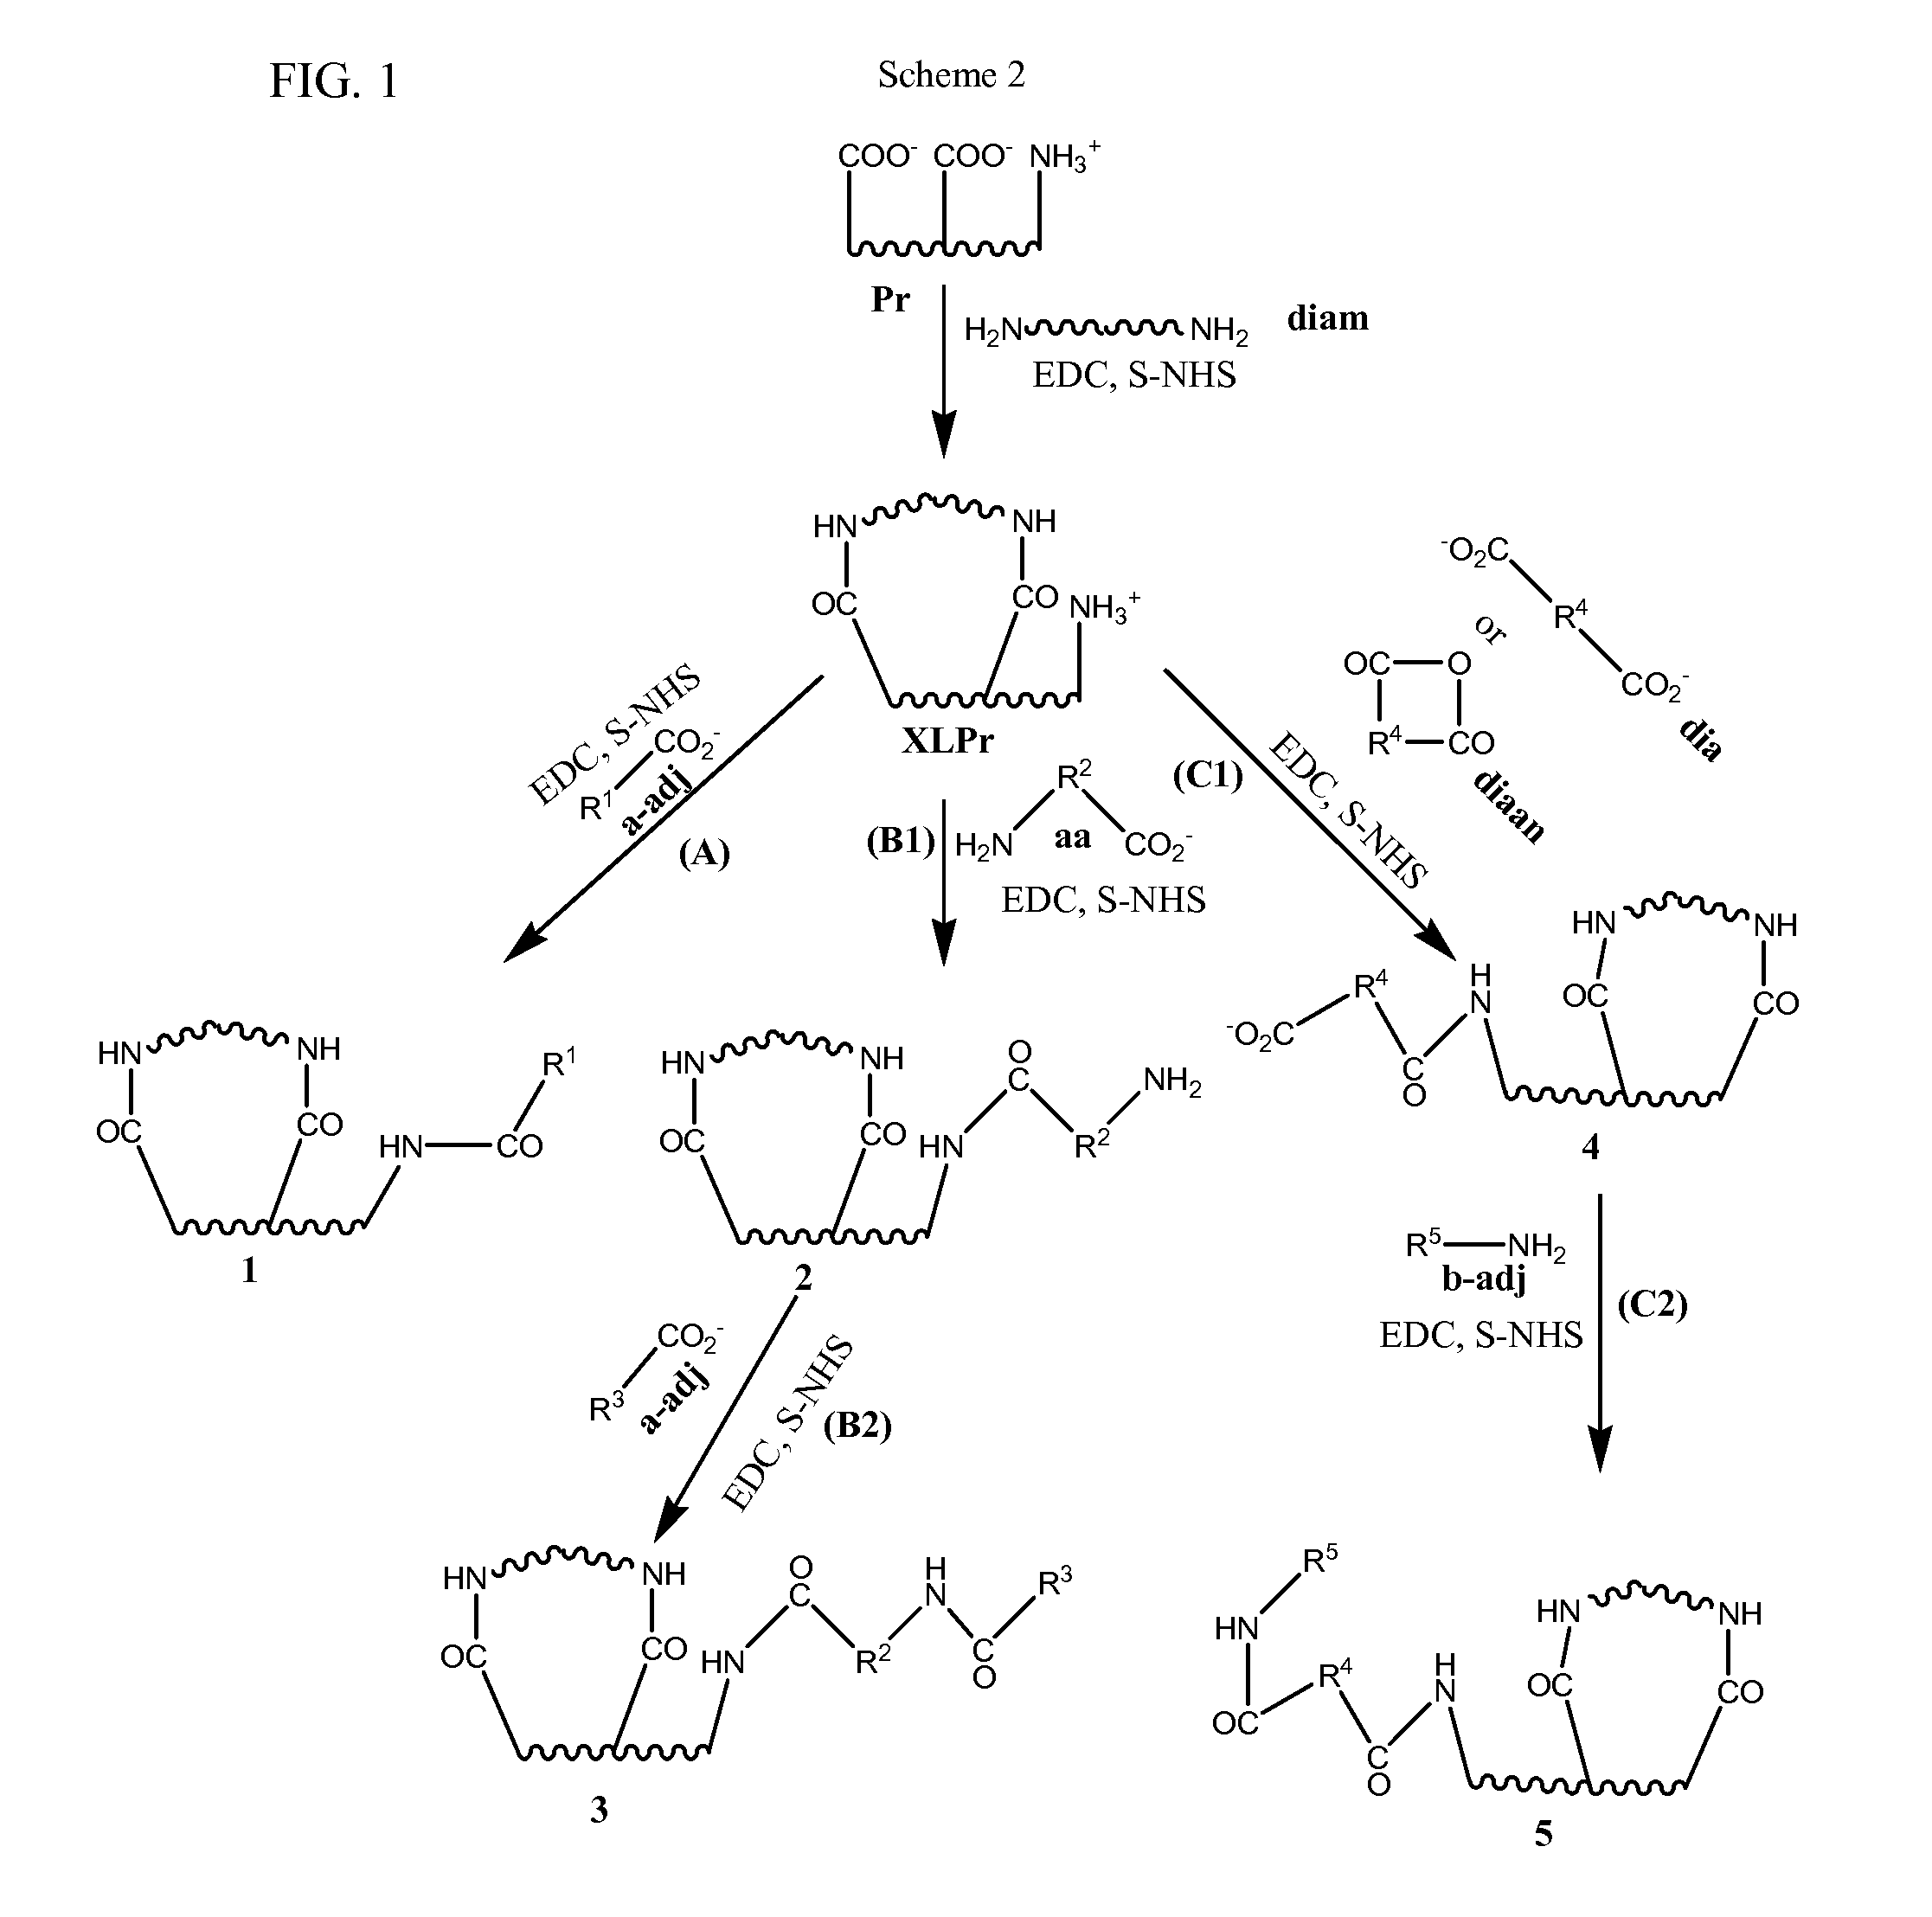 Stabilized, sterilized collagen scaffolds with active adjuncts attached